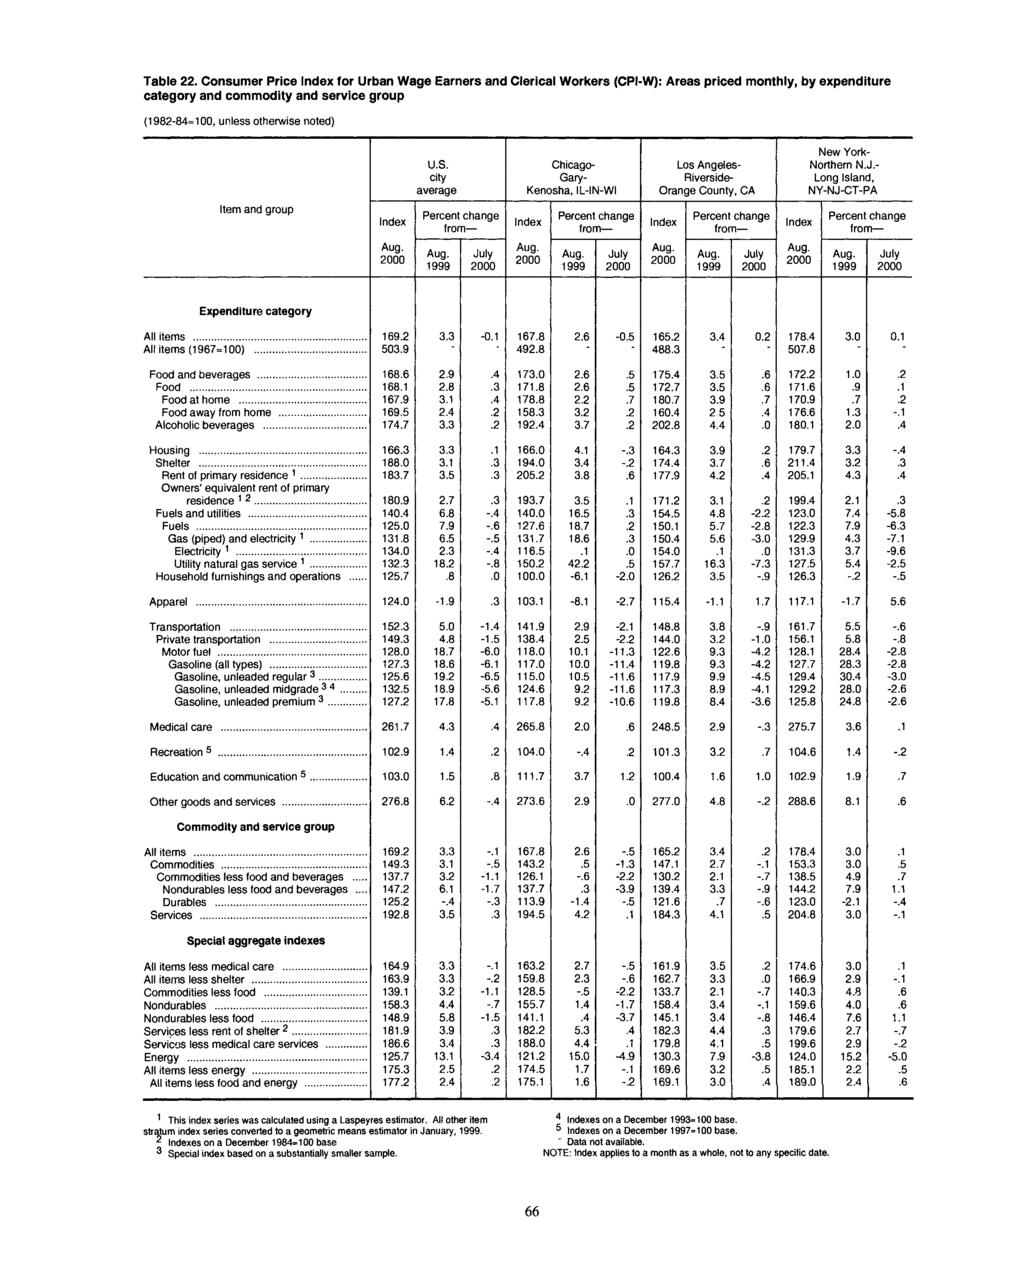 Table 22. Consumer Price for Urban Wage Earners and Clerical Workers (CPI-W): Areas priced monthly, by expenditure category and commodity and service group U.S.